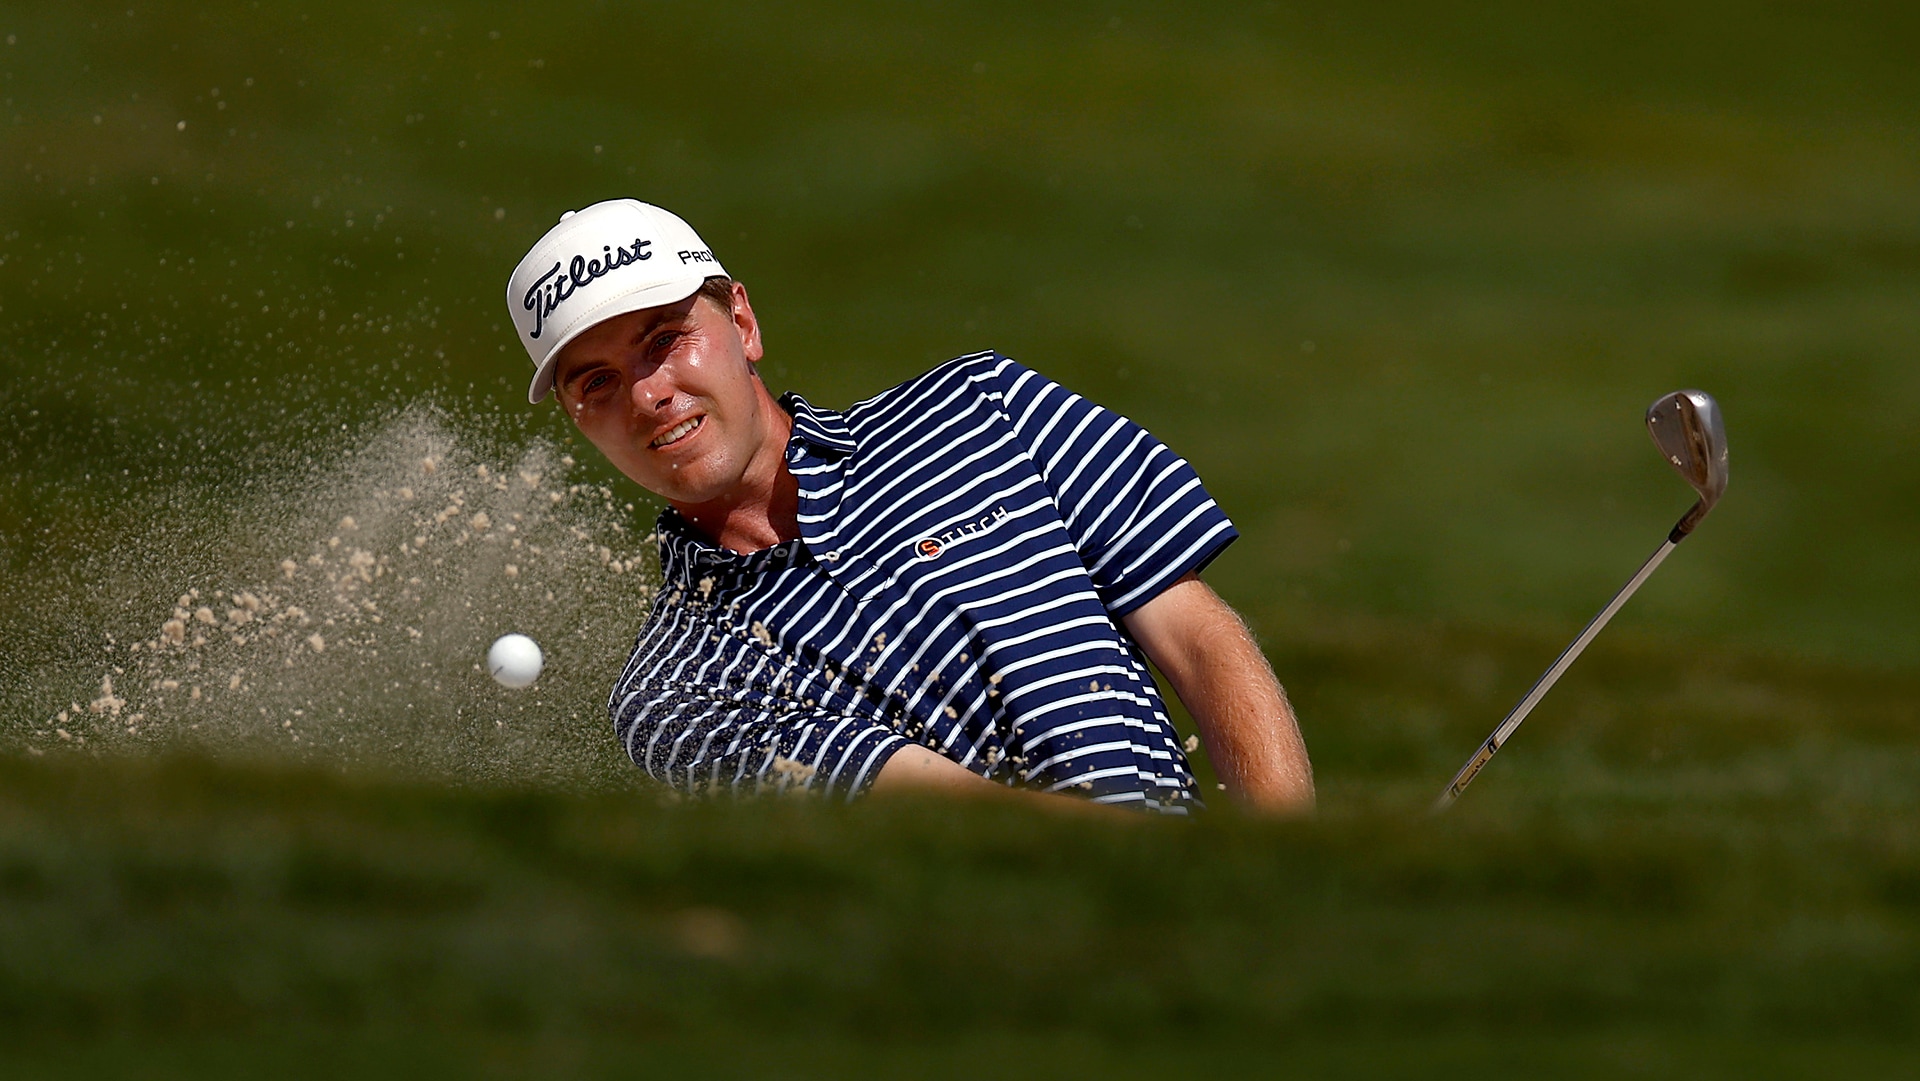 A Monday qualifier winning this week’s Honda Classic? That would be music to Ryan Gerard’s ears